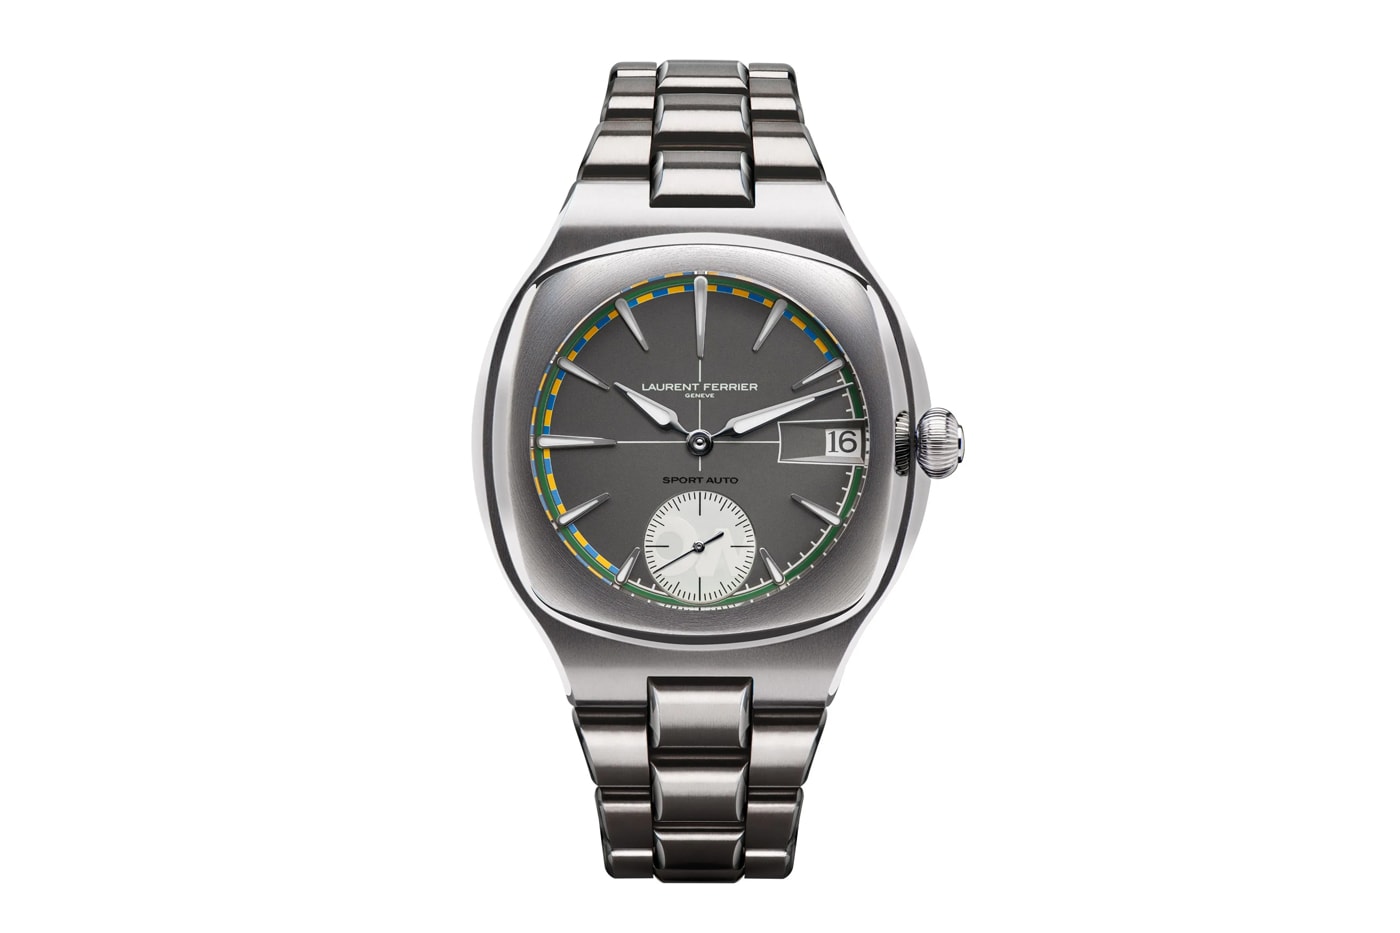 Laurent Ferrier Sport Auto “On Track” Only Watch Info